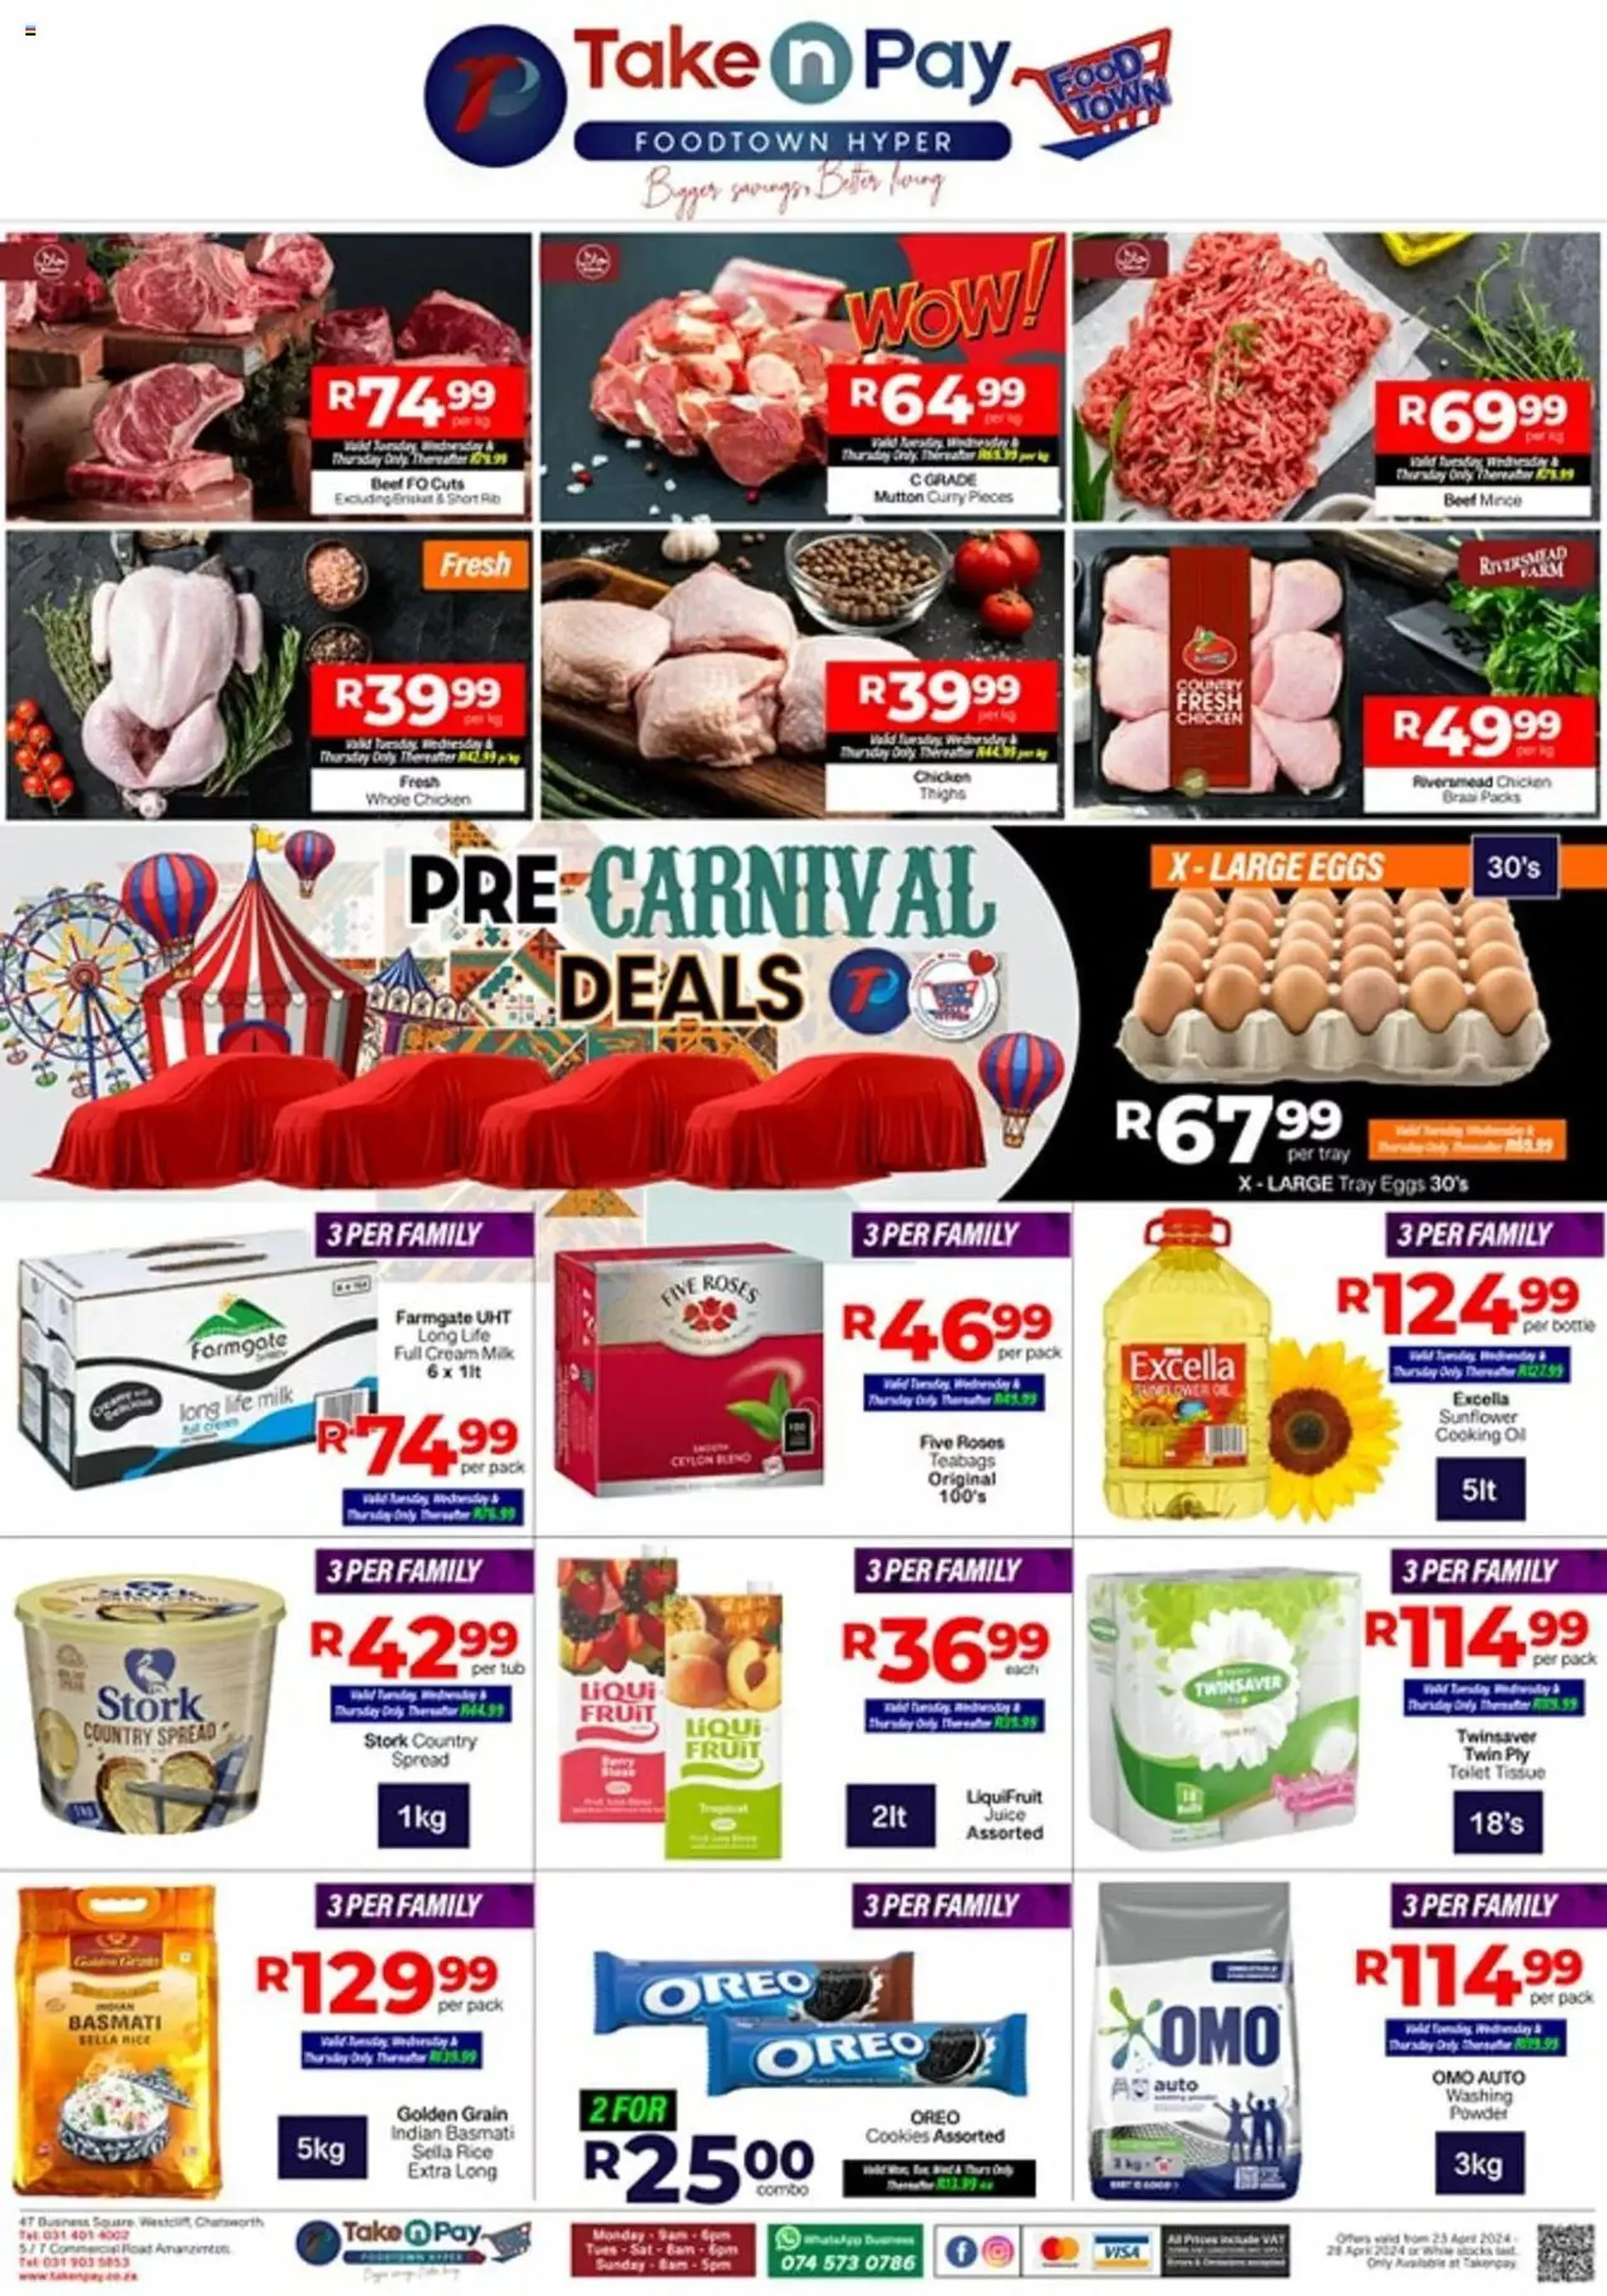 Take n Pay Specials - 0